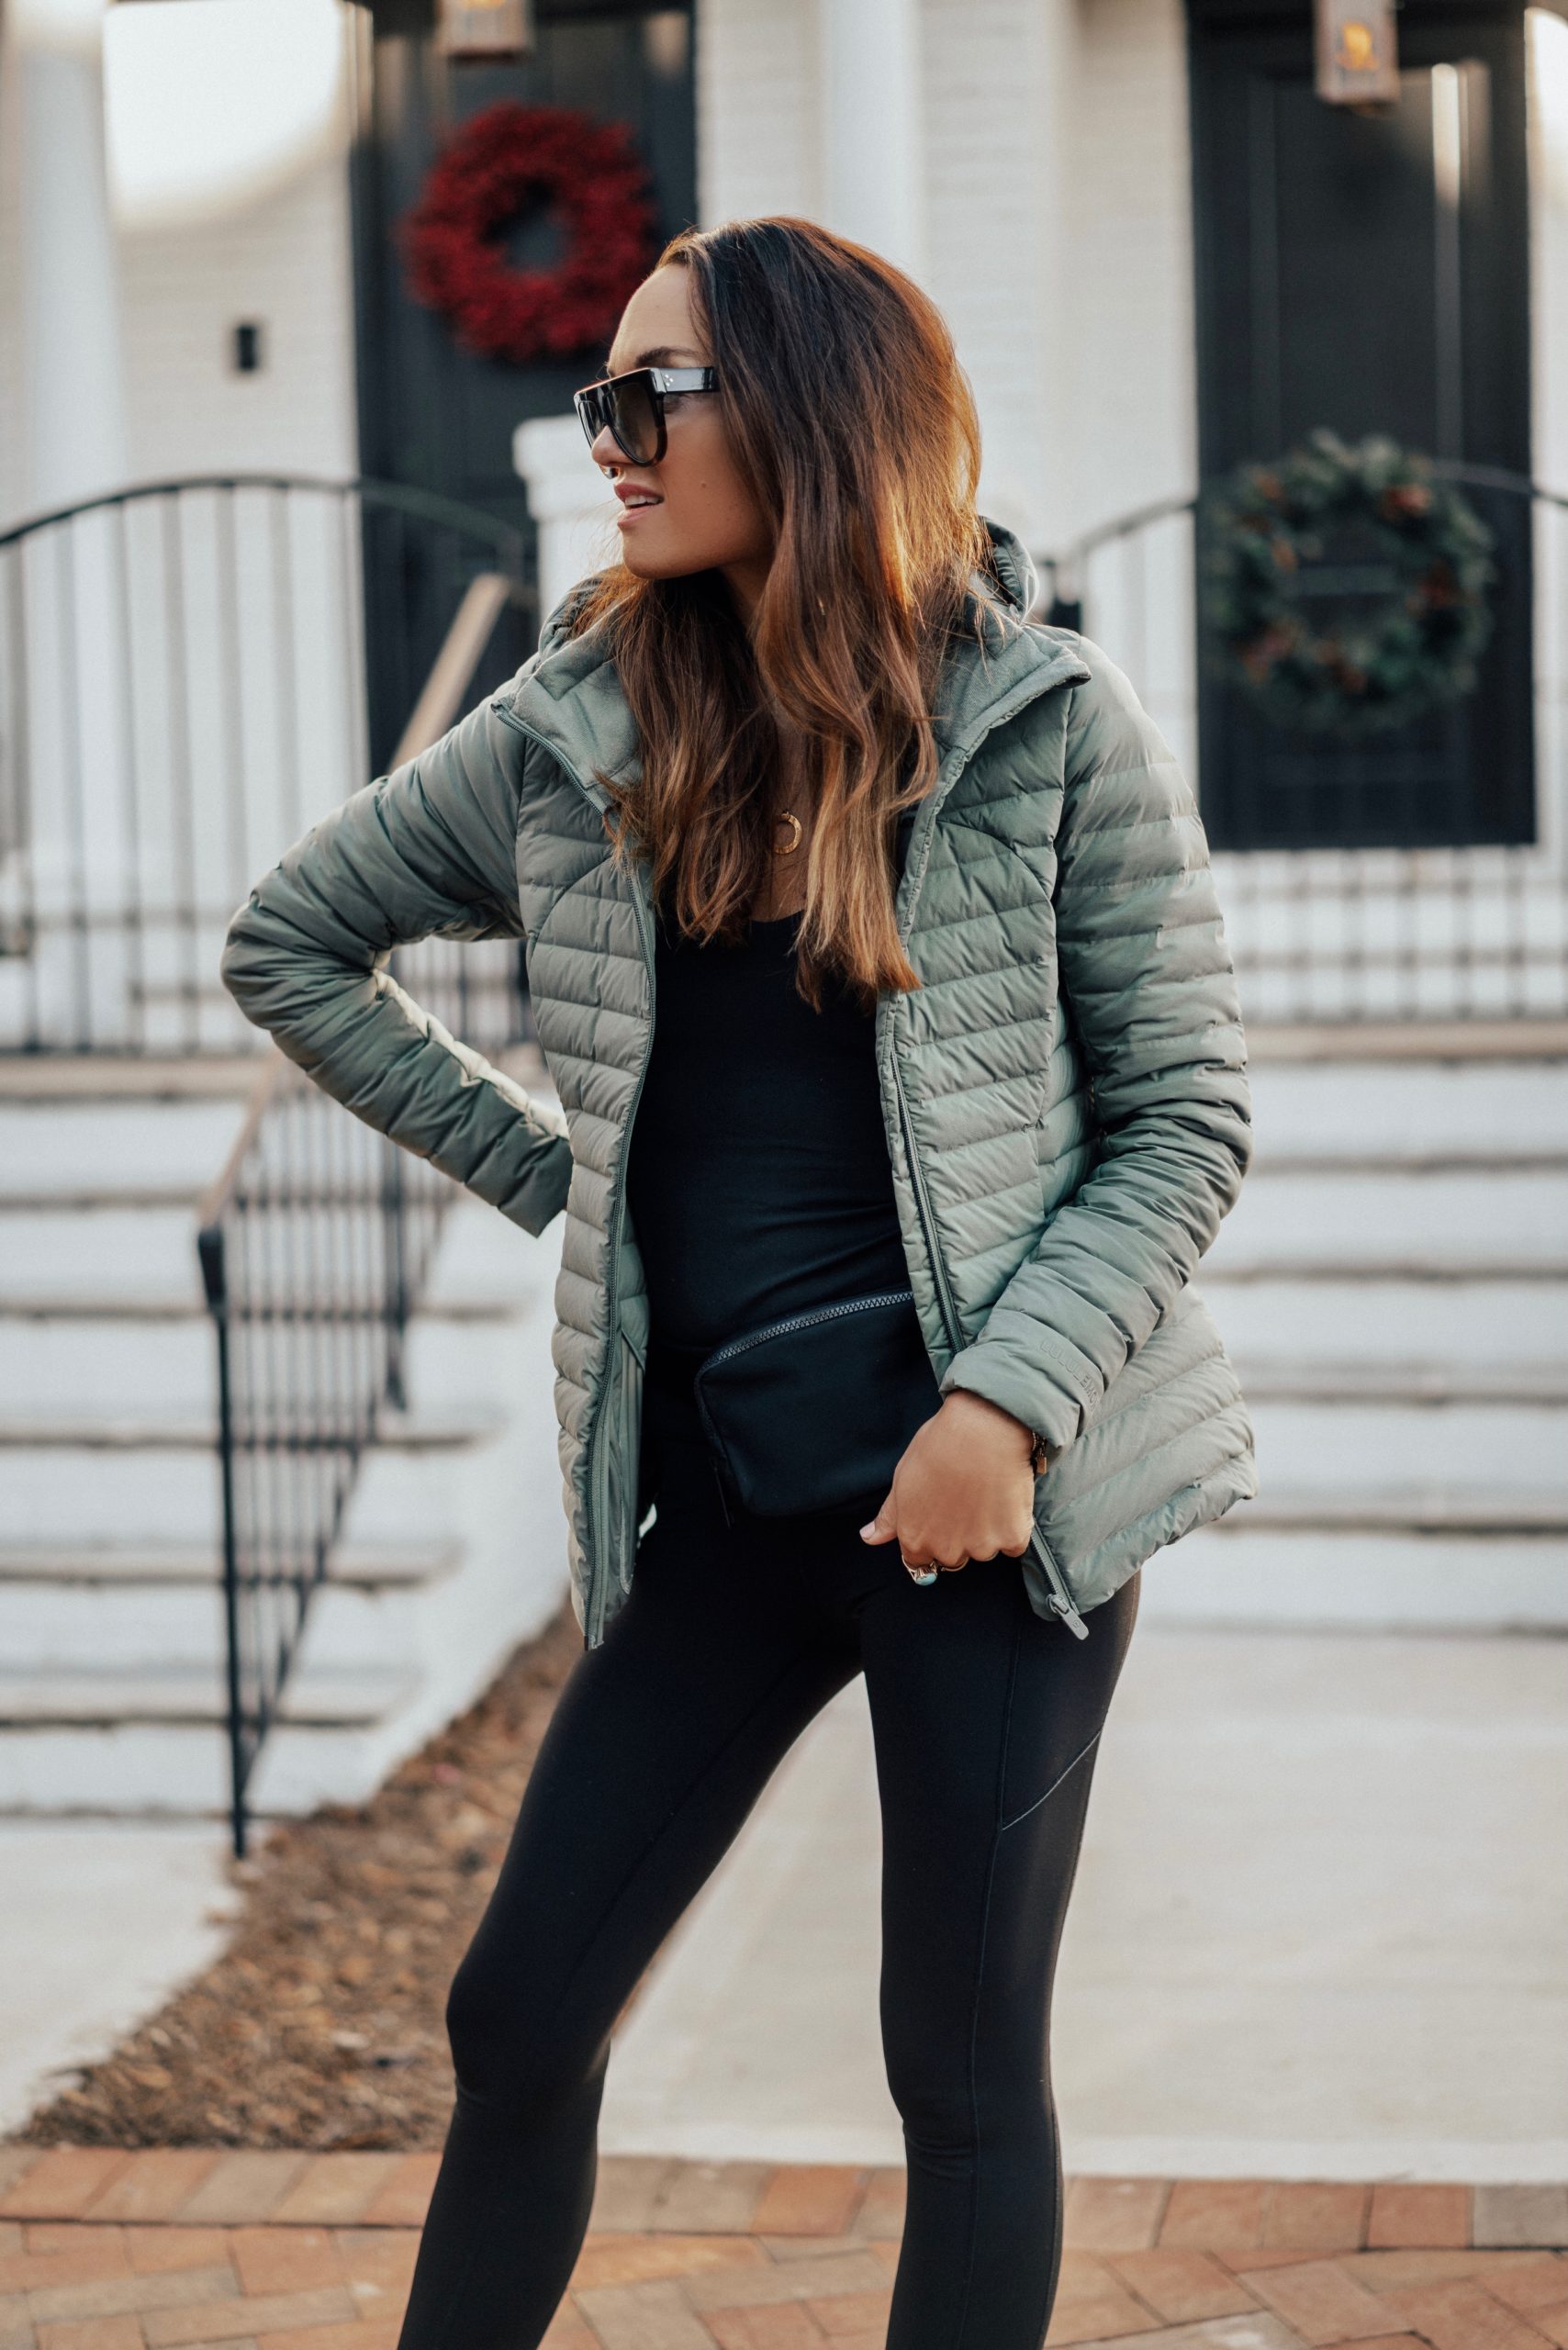 Ready to brave the cold with Ready to Rulu and Wunder Puff jacket! The  Heathered peri purple of the joggers go well with the iridescence of the  jacket! : r/lululemon